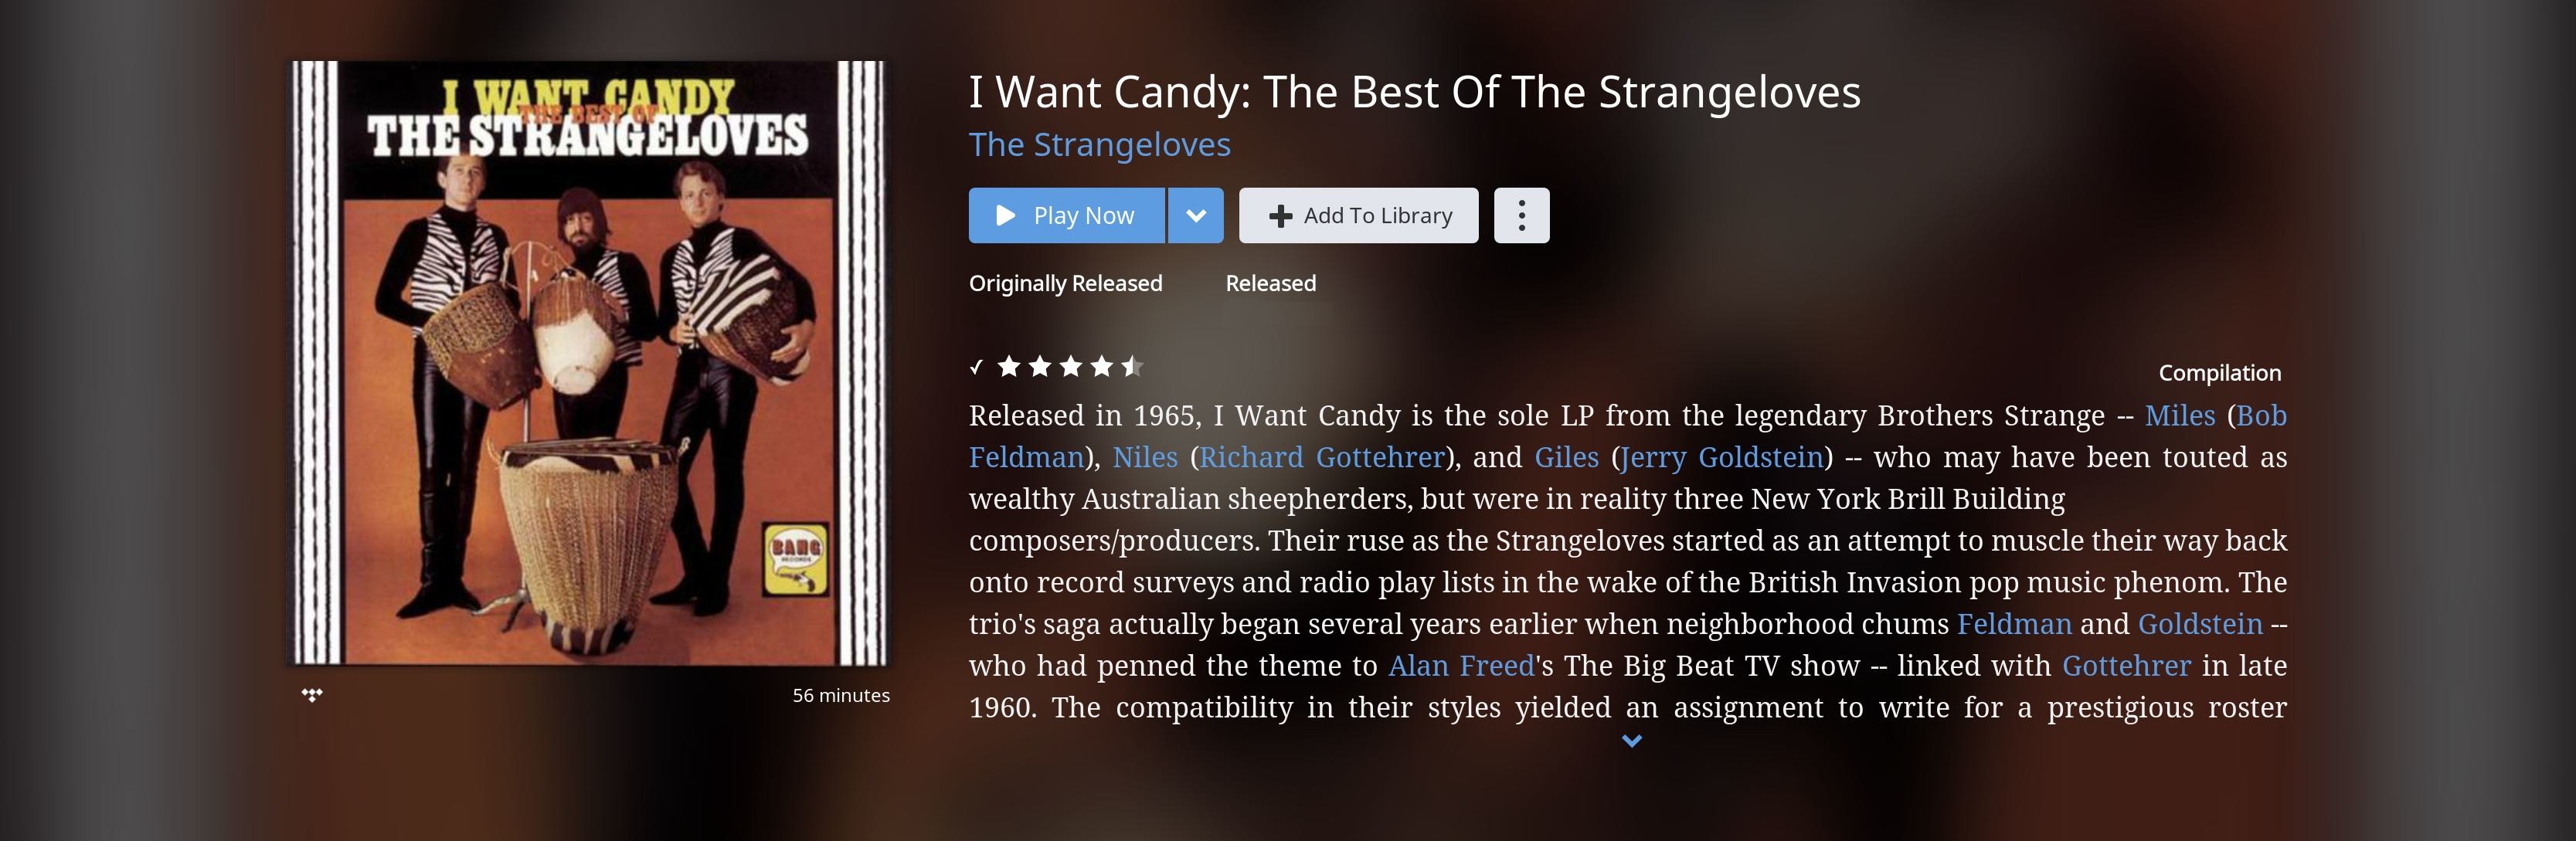 More information about "The Music In Me: Candy From Sheep (The Strangeloves Story)"